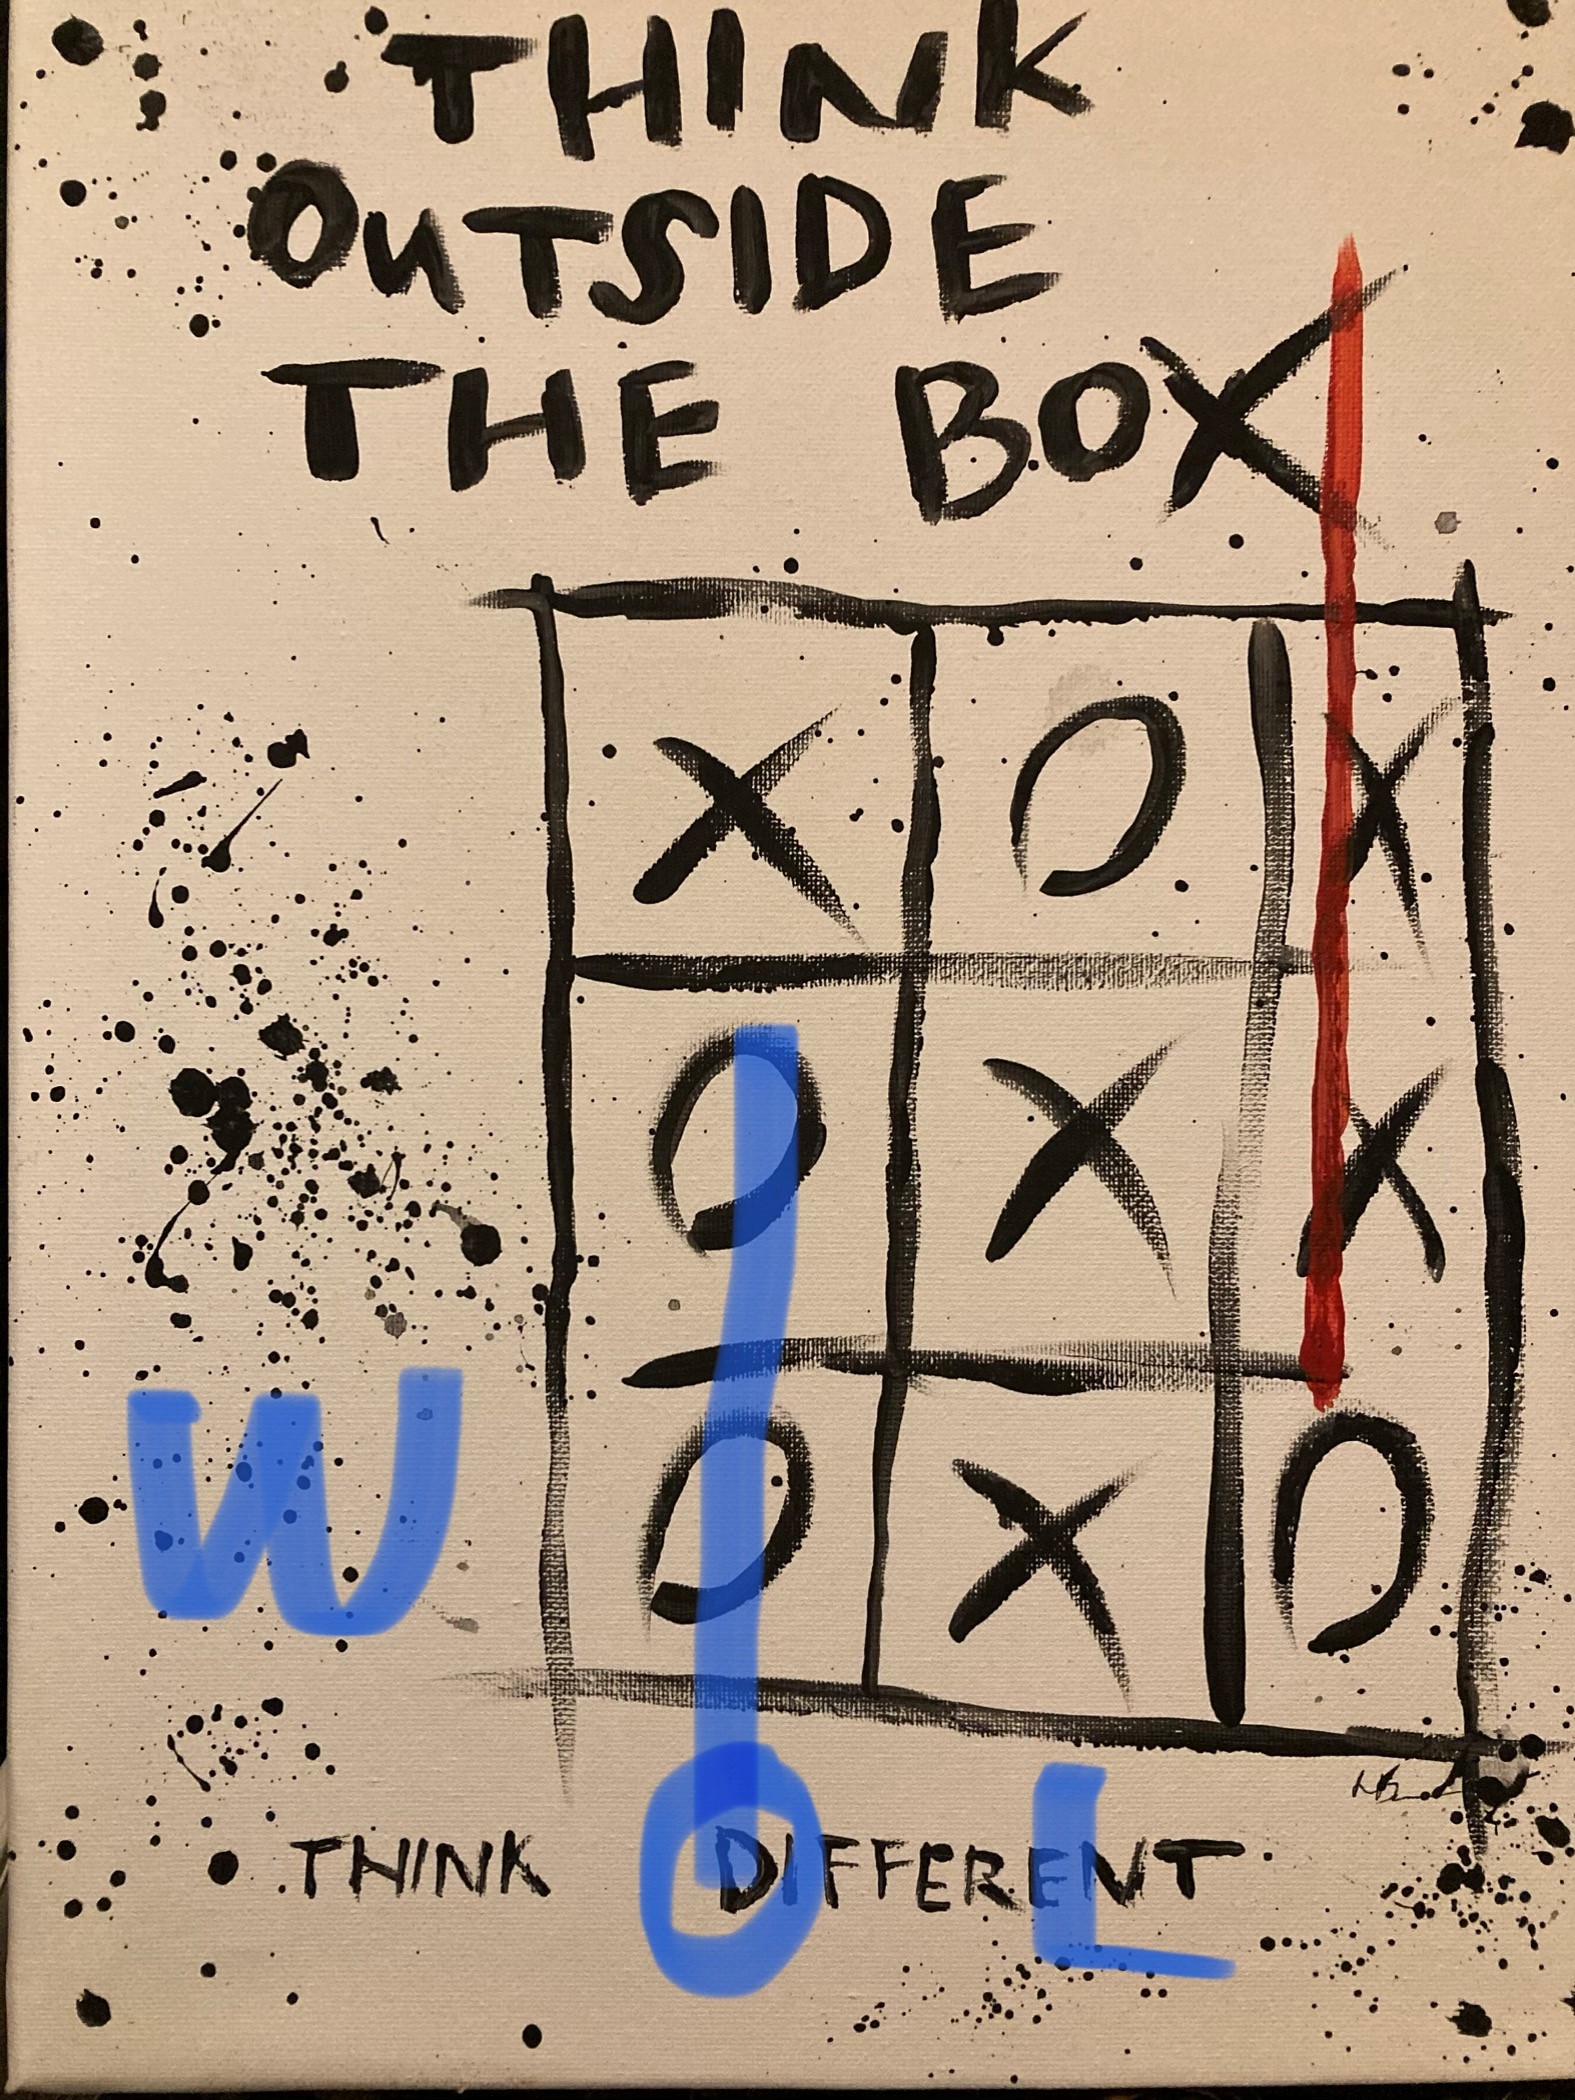 Illustration Schrift auf Paper: "Think outside the box. Working Out Loud #WOL"